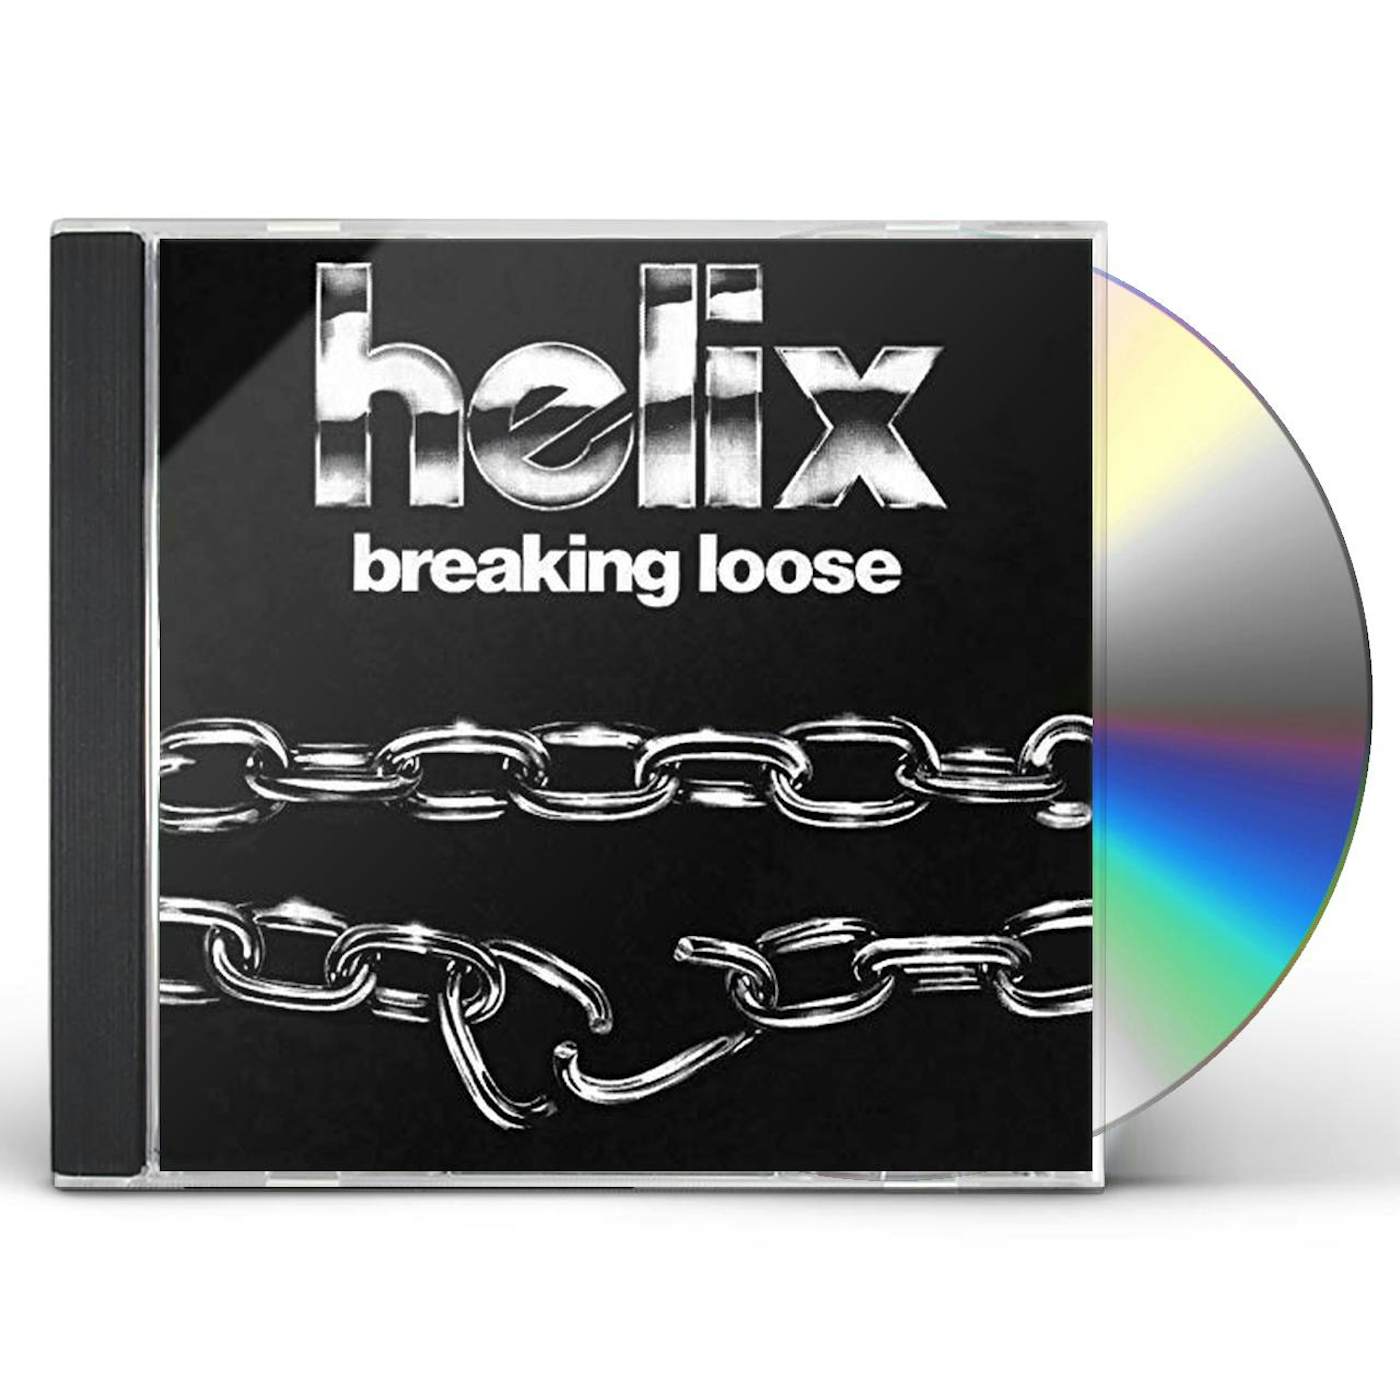 Helix BREAKING LOOSE - 40TH ANNIVERSARY EDITION CD